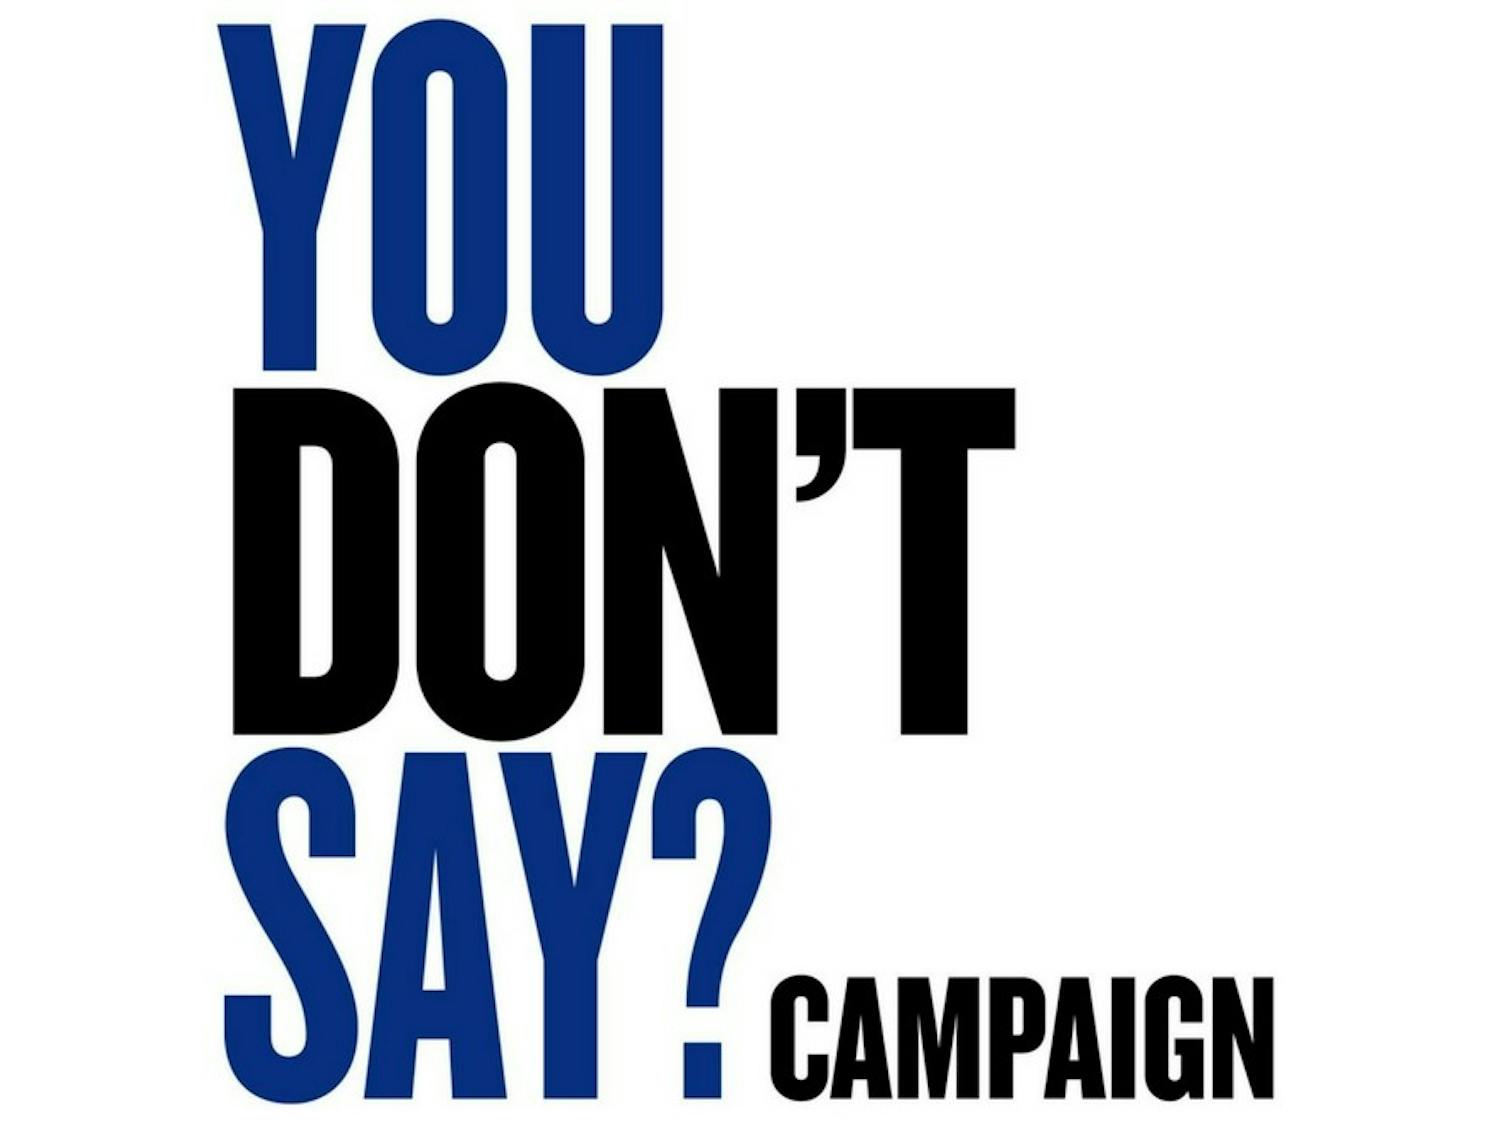 Founded in 2014, the "You Don't Say?" campaign has helped inspire over 150 similar campaigns on six different continents.